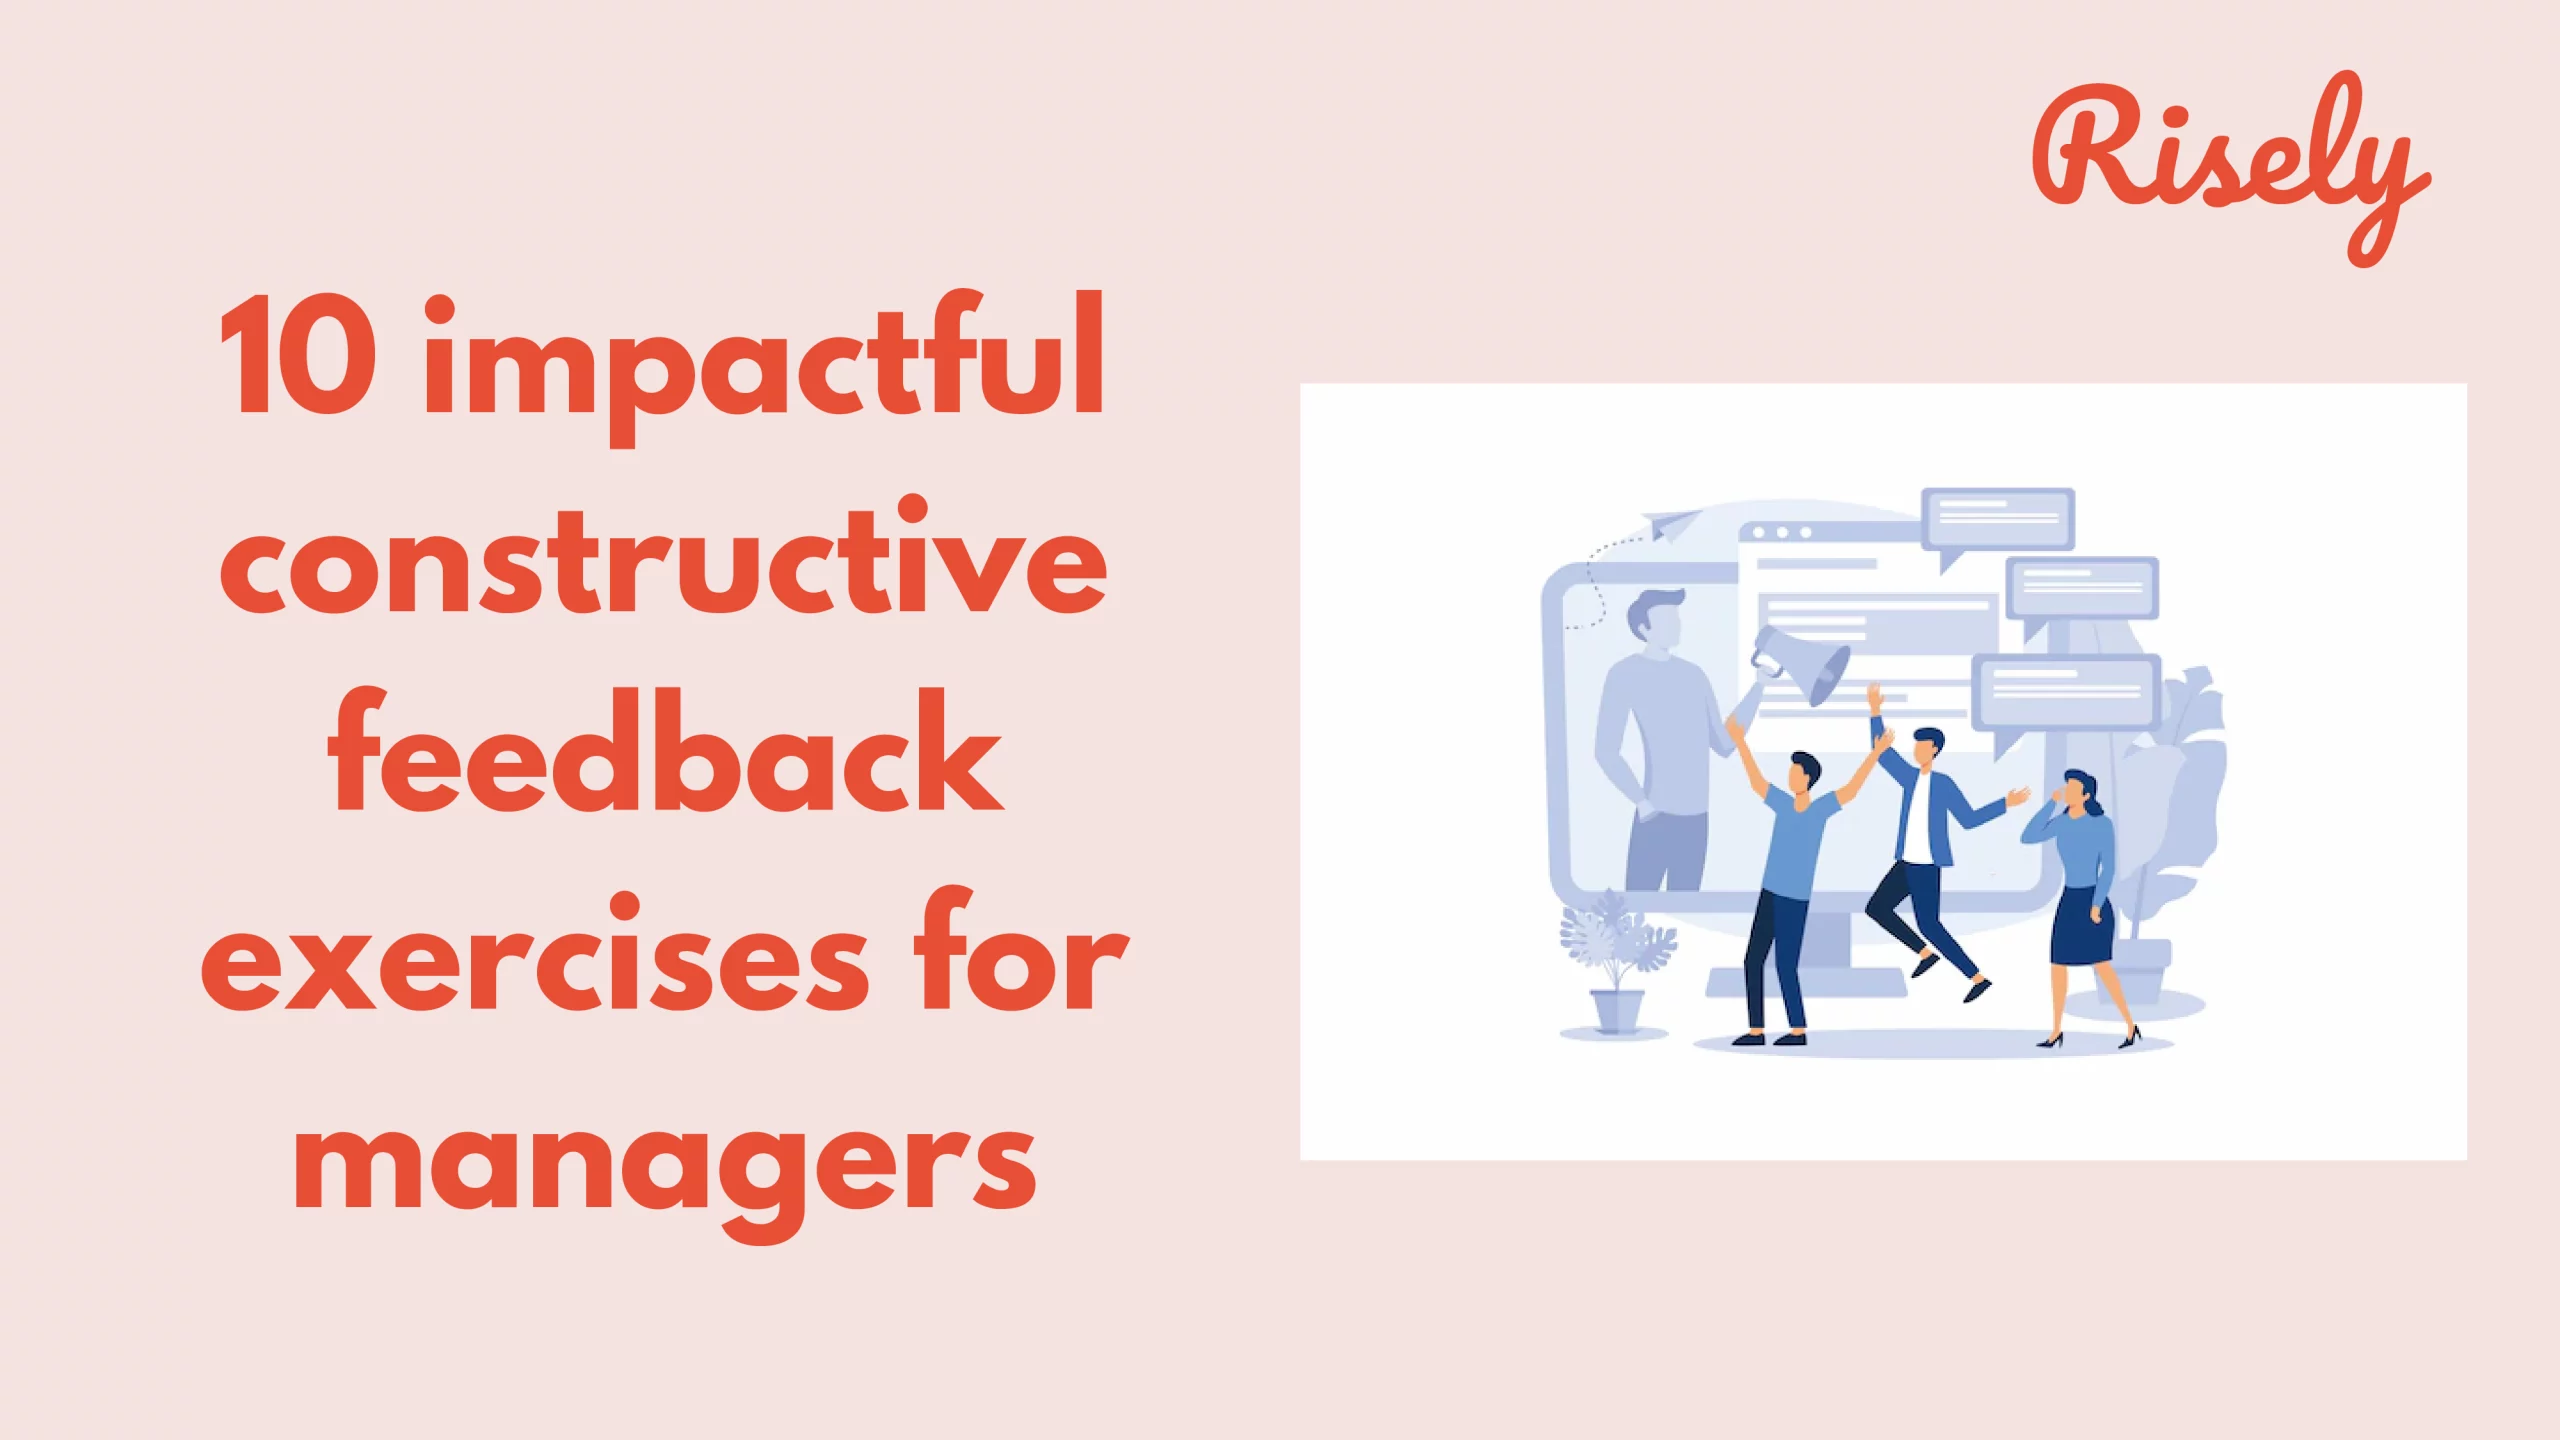 10 impactful constructive feedback exercises for managers